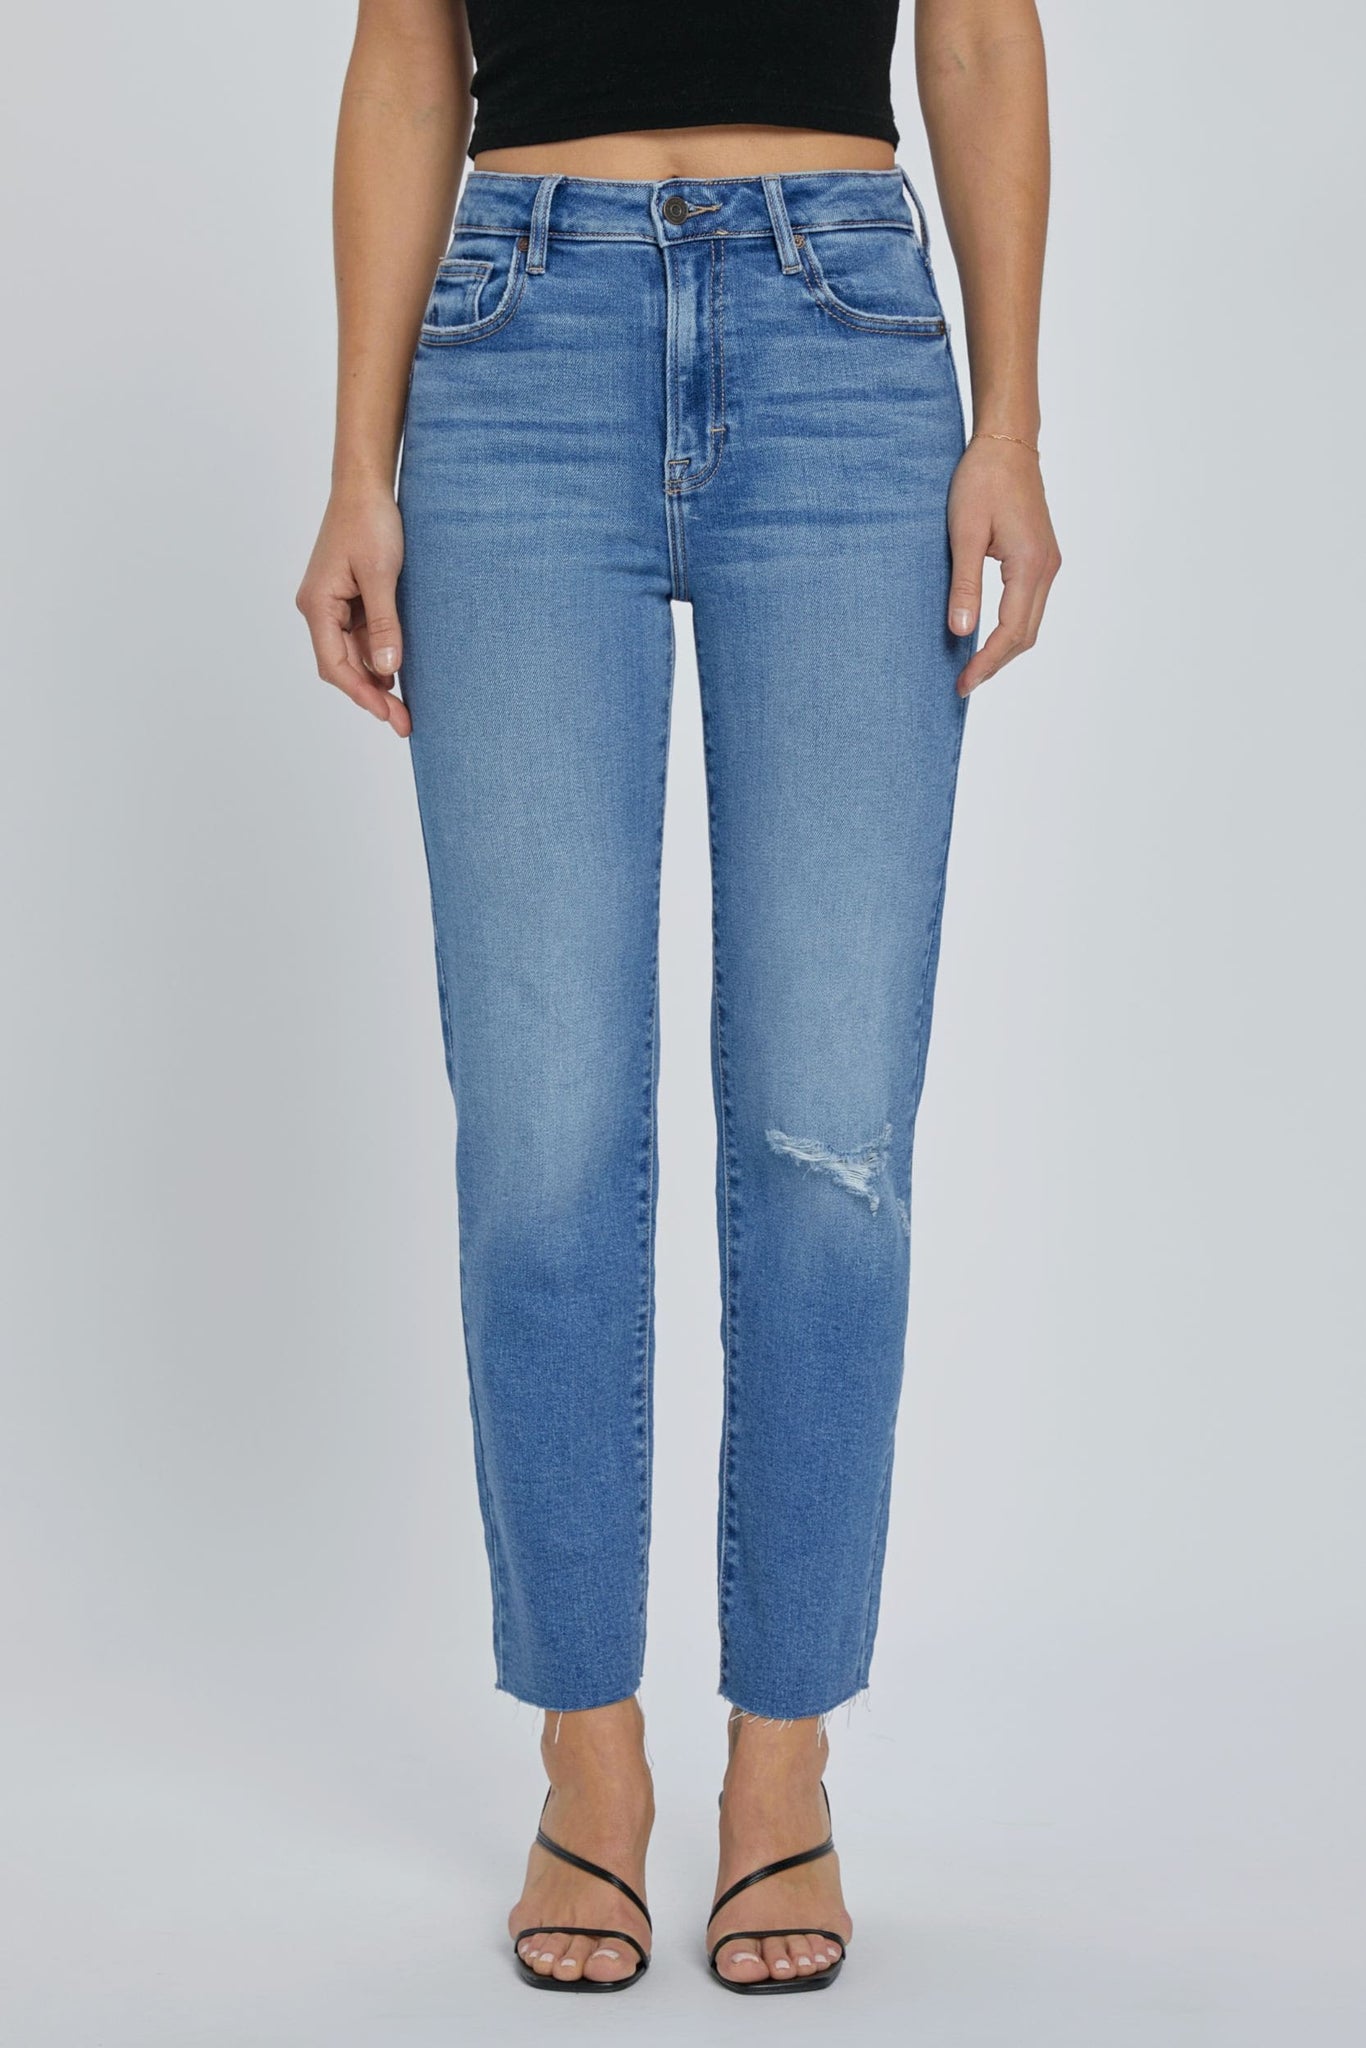 The Tracey High Rise Straight Denim in Medium Blue is designed for all-day comfort and style. These straight fit jeans have a high rise waist, an easy fit from hip to ankle, and a medium blue wash. The soft, stretchy fabric ensures a comfortable fit.